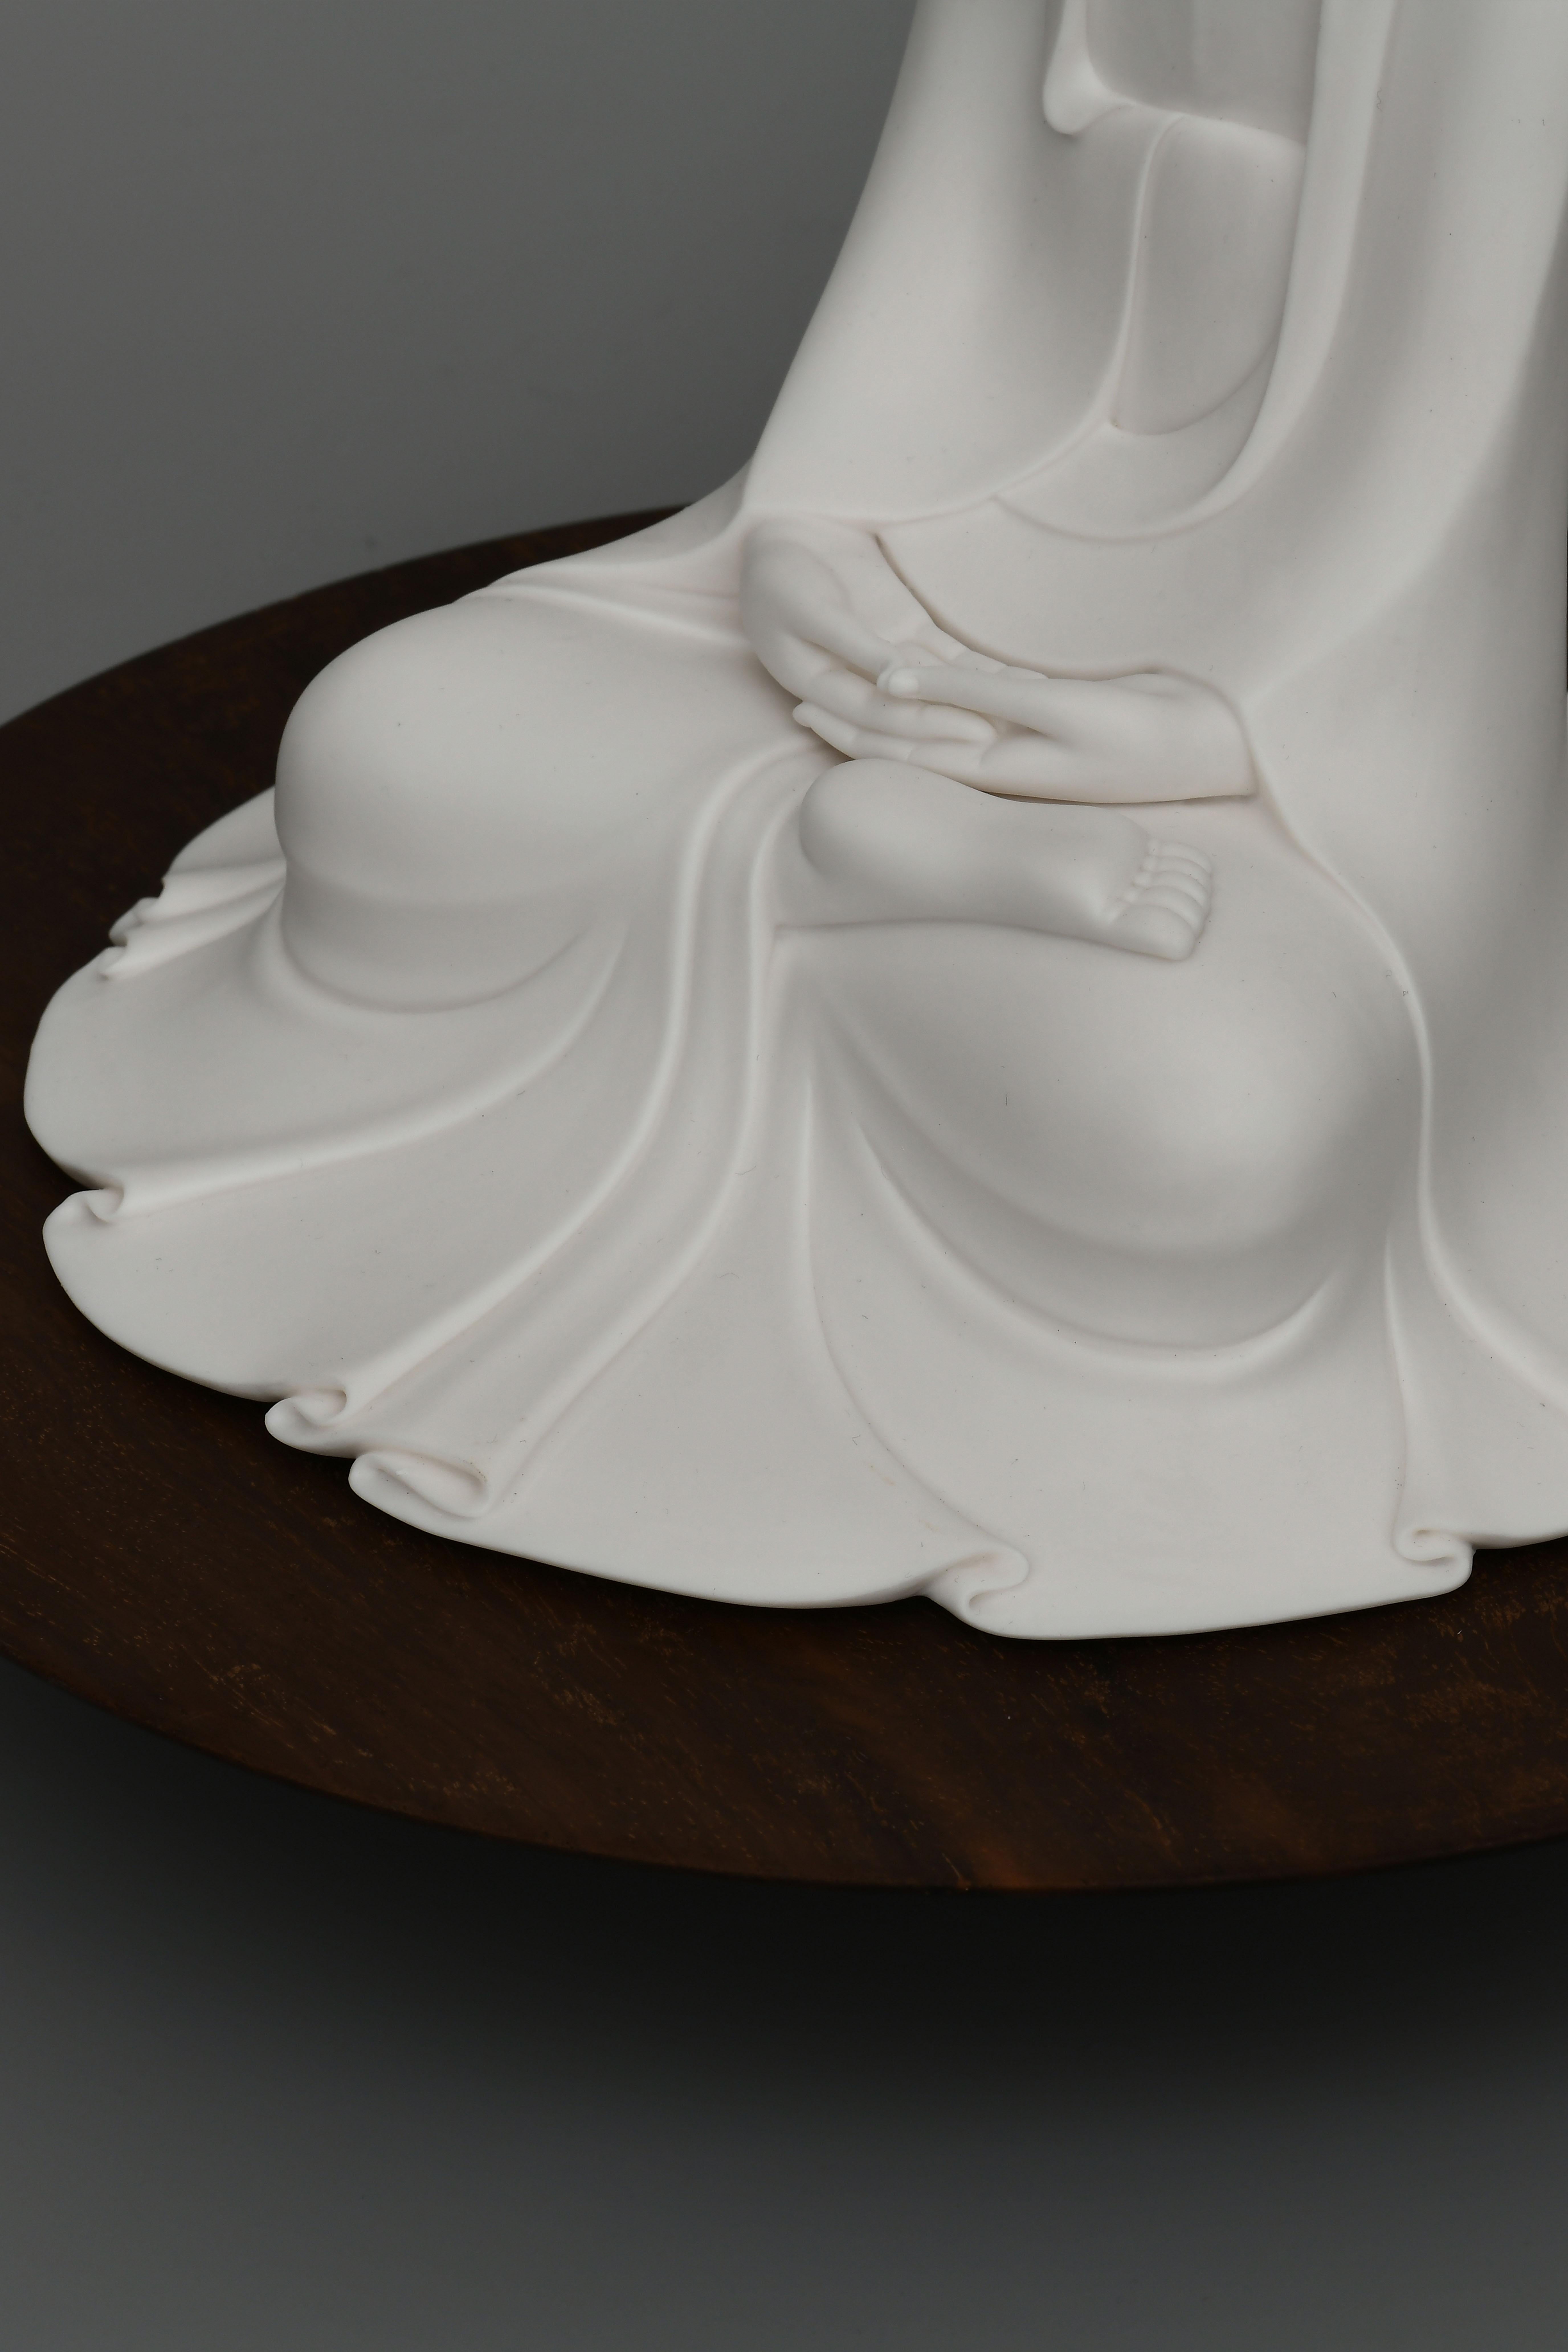 Sakyamuni, originally Siddhartha Gotama, is the founder of Buddhism and known as the Buddha, namely the awakened one, in later ages.
This sculpture of Sakyamuni is sitting peacefully in the semi-lotus posture with arched eyebrows, downcast eyes and